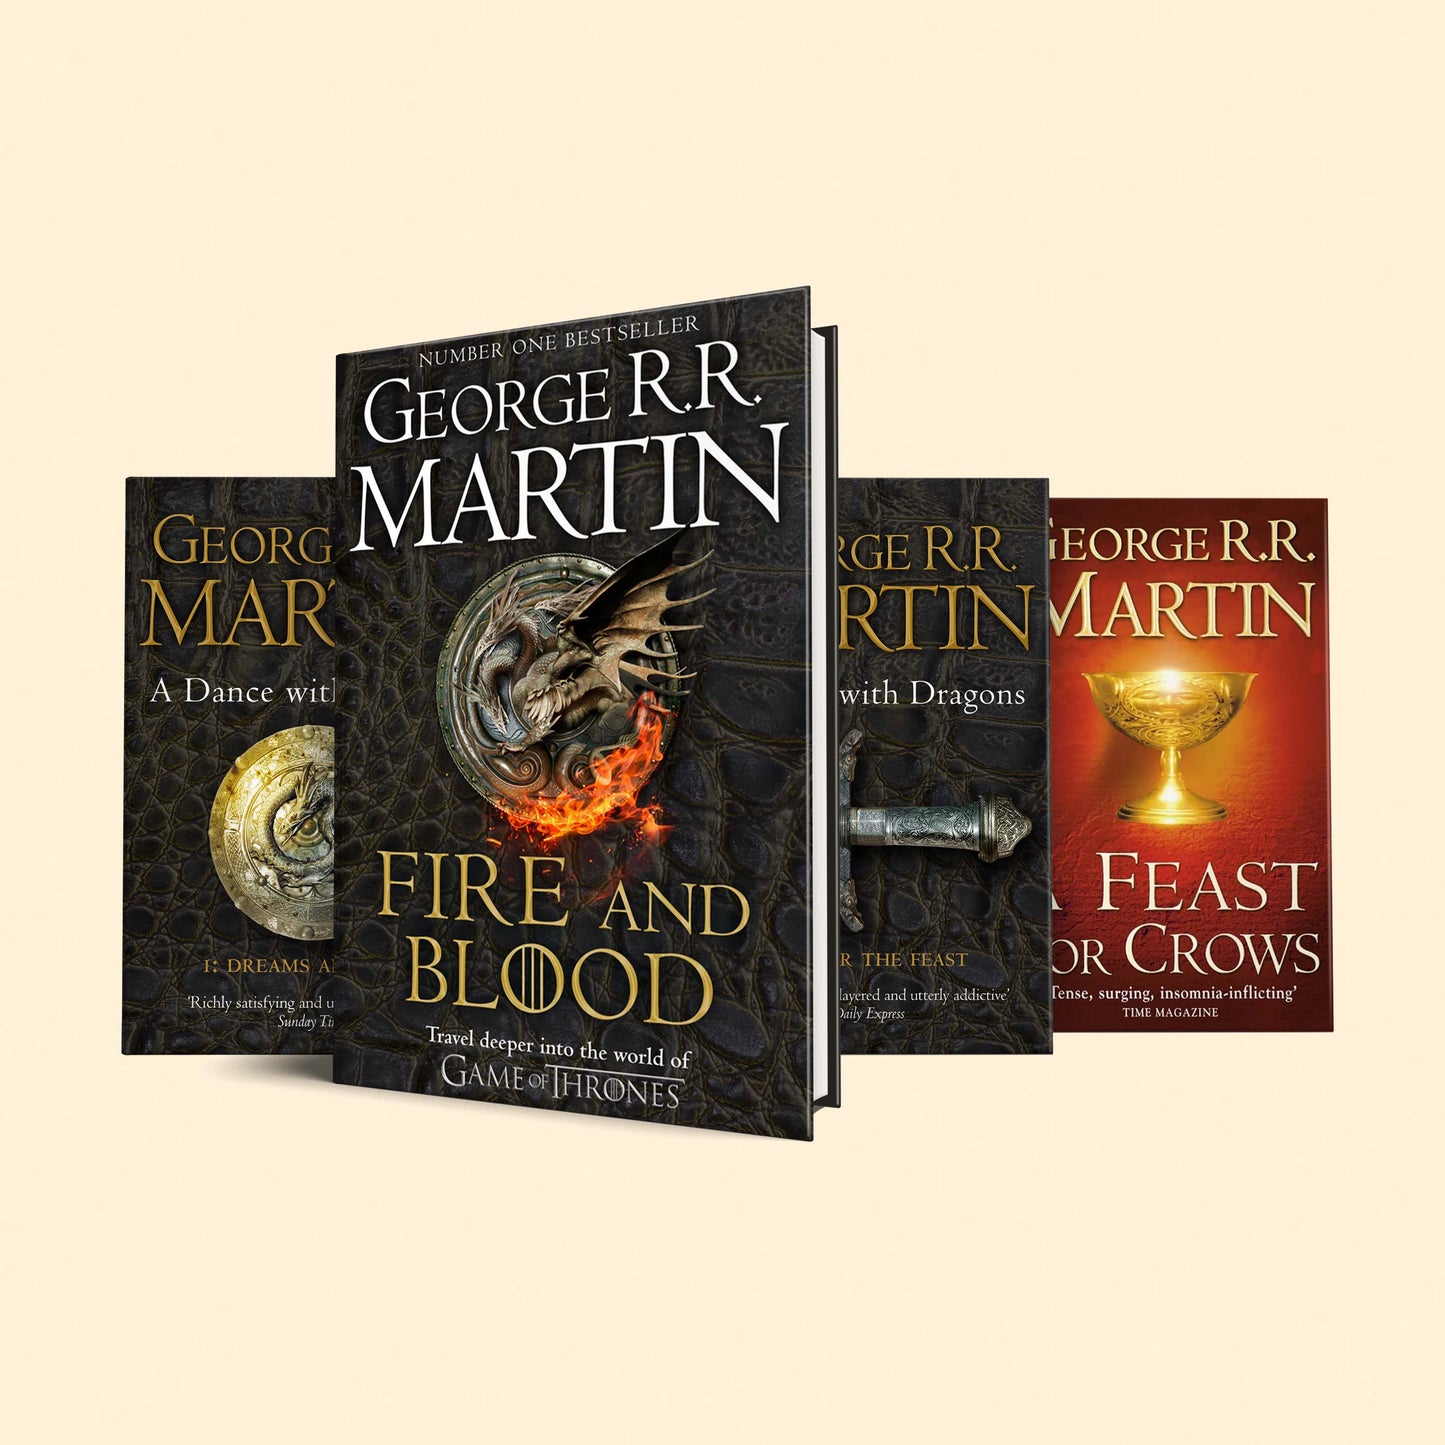 GOT set 2: A Feast for Crows, Dance with Dragons Part 1: Dreams and Dust, A Dance With Dragons Part 2: After the Feast, Fire & Blood